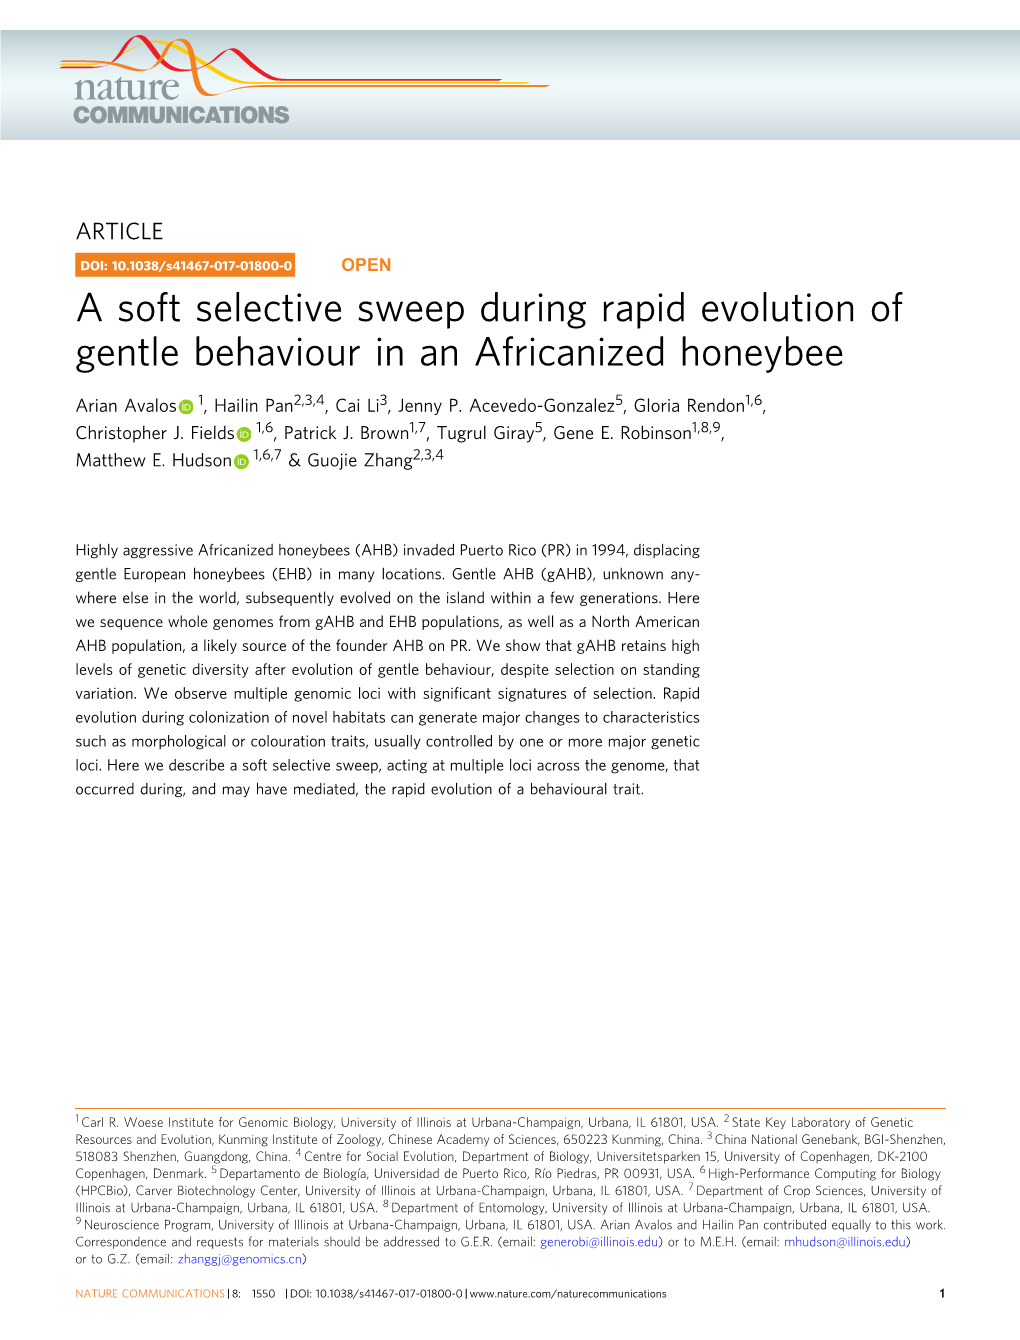 A Soft Selective Sweep During Rapid Evolution of Gentle Behaviour in an Africanized Honeybee